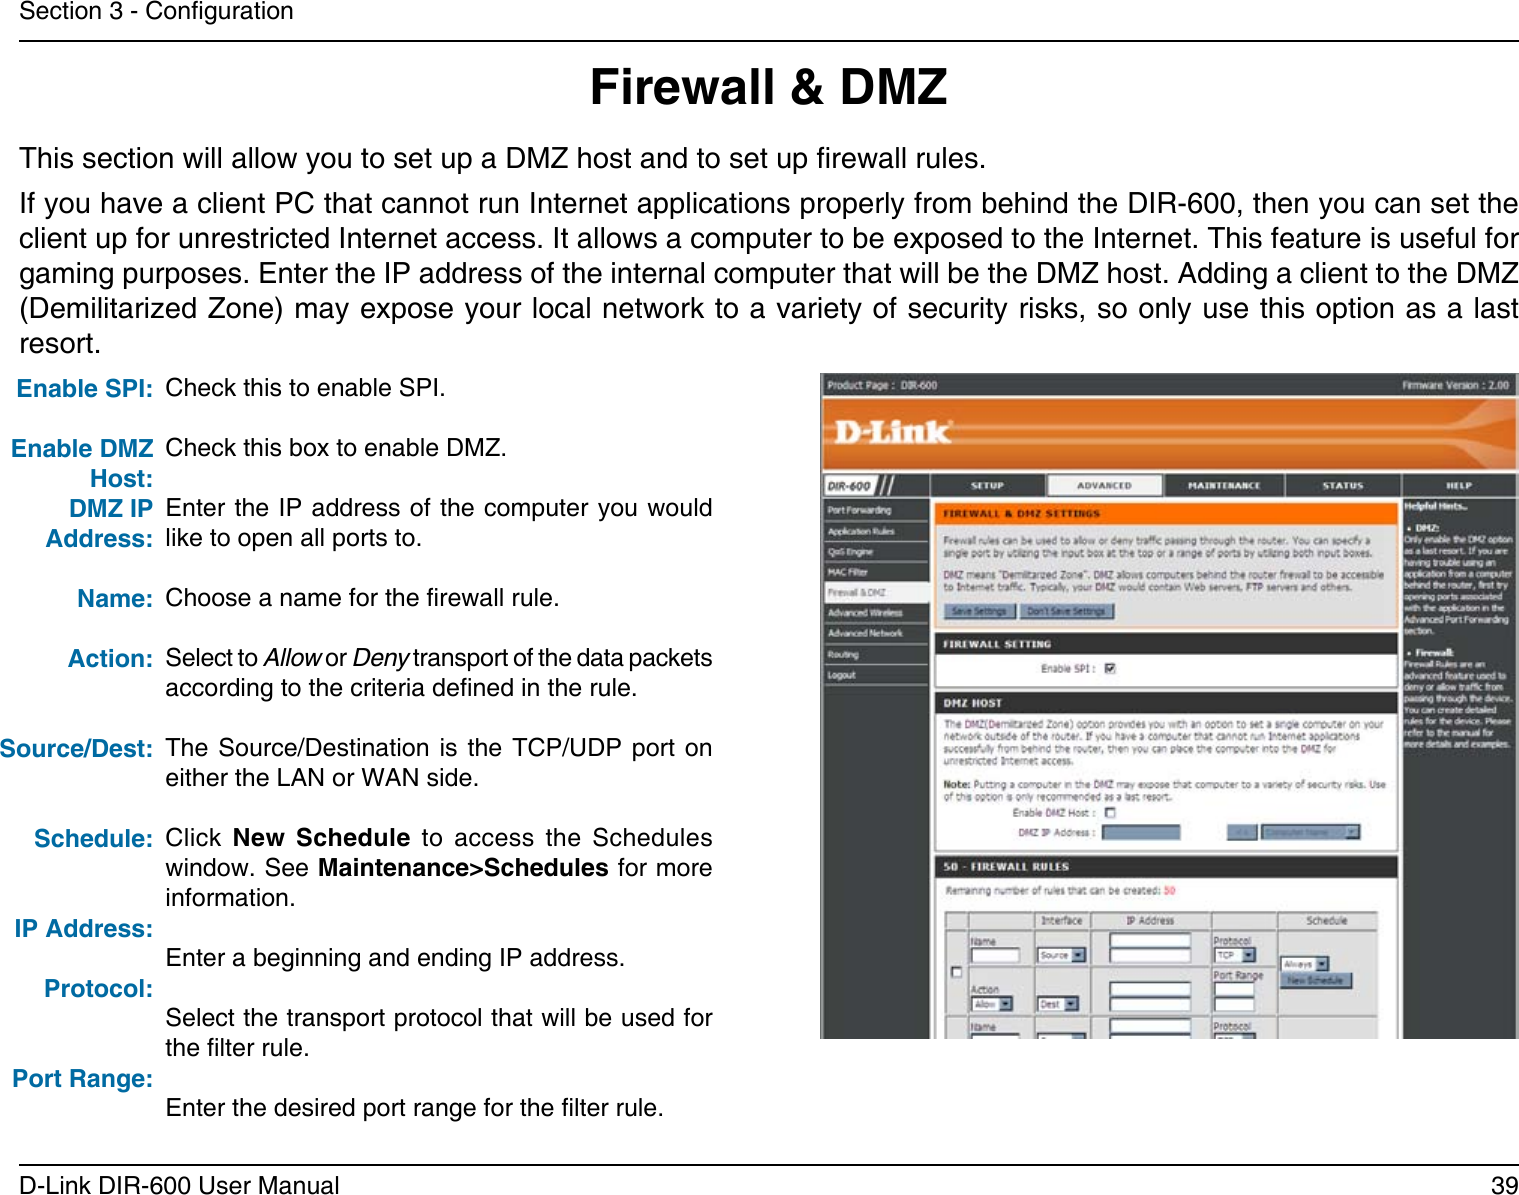 39D-Link DIR-600 User ManualSection 3 - CongurationFirewall &amp; DMZThis section will allow you to set up a DMZ host and to set up rewall rules.If you have a client PC that cannot run Internet applications properly from behind the DIR-600, then you can set the client up for unrestricted Internet access. It allows a computer to be exposed to the Internet. This feature is useful for gaming purposes. Enter the IP address of the internal computer that will be the DMZ host. Adding a client to the DMZ (Demilitarized Zone) may expose your local network to a variety of security risks, so only use this option as a last resort.Check this to enable SPI.Check this box to enable DMZ.Enter the IP address of the computer you would like to open all ports to.Choose a name for the rewall rule.Select to Allow or Deny transport of the data packets according to the criteria dened in the rule. The Source/Destination  is the  TCP/UDP port  on either the LAN or WAN side.Click  New  Schedule  to  access  the  Schedules window. See Maintenance&gt;Schedules for more information.Enter a beginning and ending IP address.Select the transport protocol that will be used for the lter rule.Enter the desired port range for the lter rule.Enable DMZ Host:DMZ IP Address:Name:Action:Source/Dest:Schedule:IP Address:Protocol:Port Range: Enable SPI:   